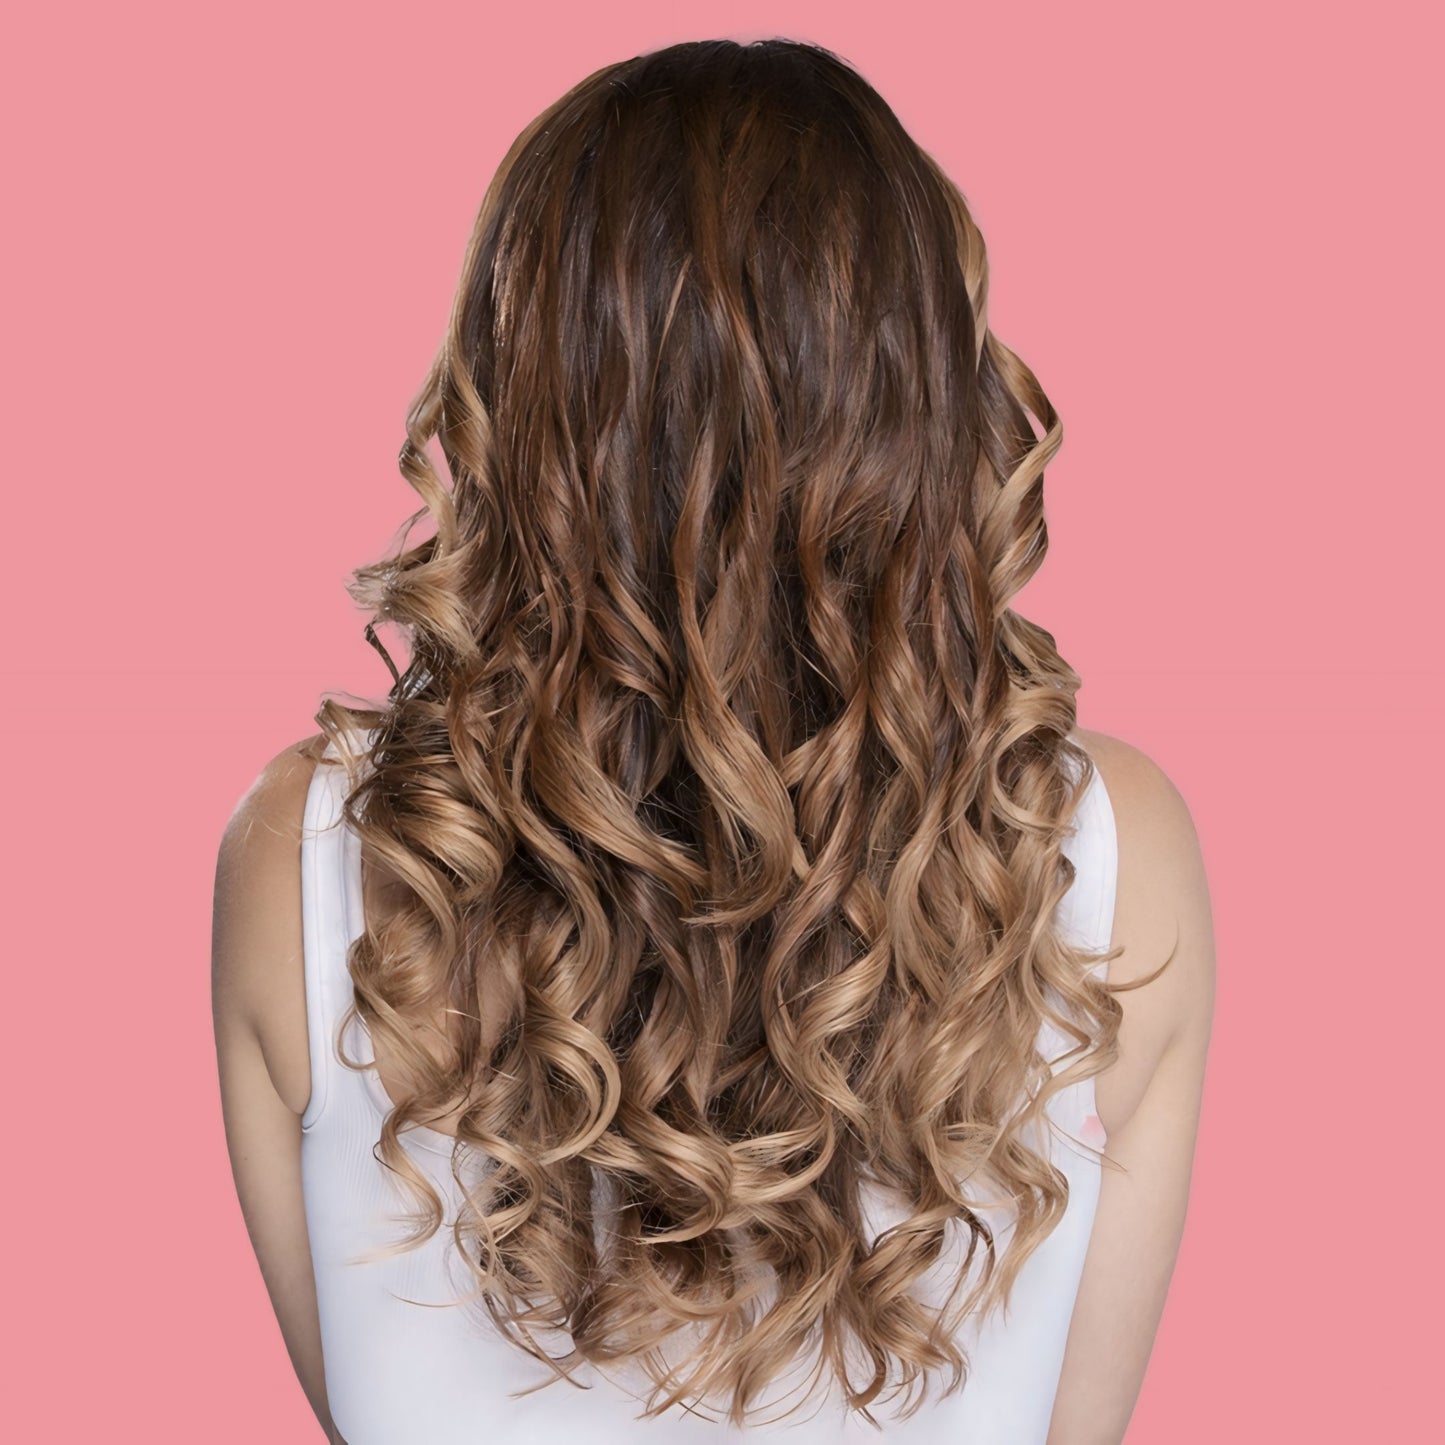 Spin and Curl Hair Styler